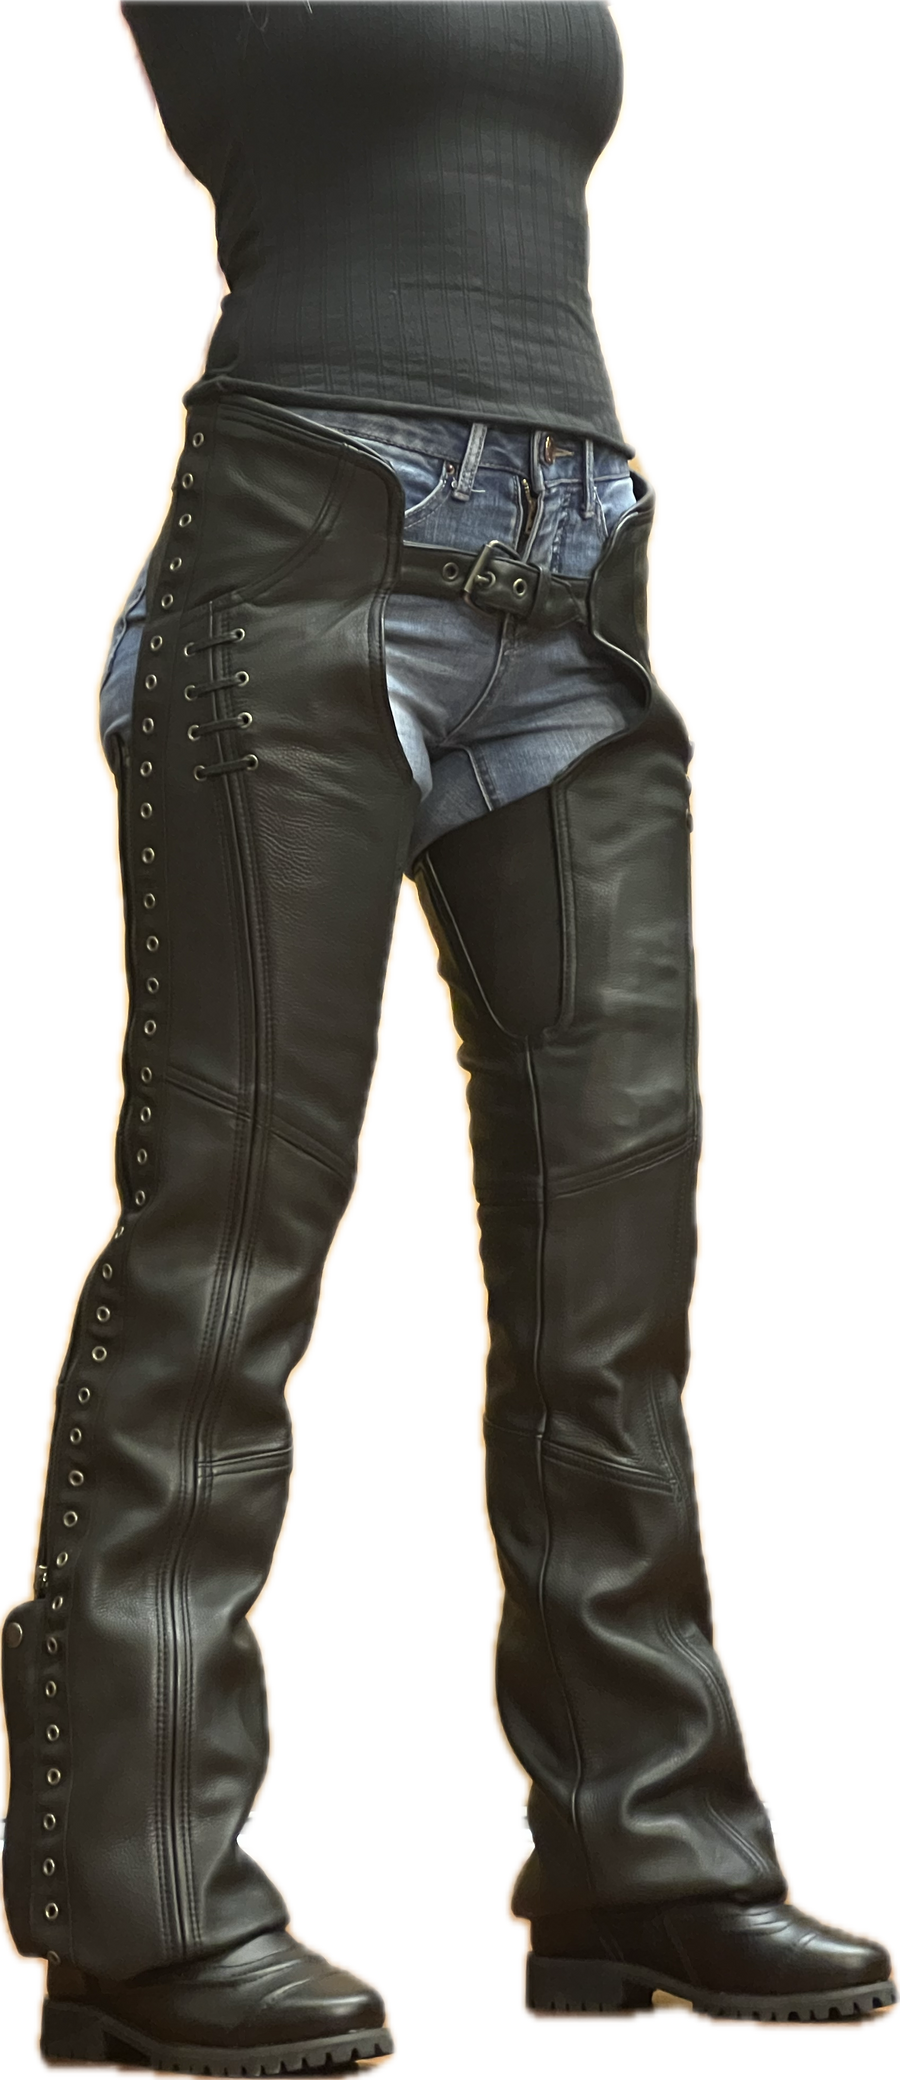 Men's Black Zip-out Pants Style Leather Motorcycle Chaps